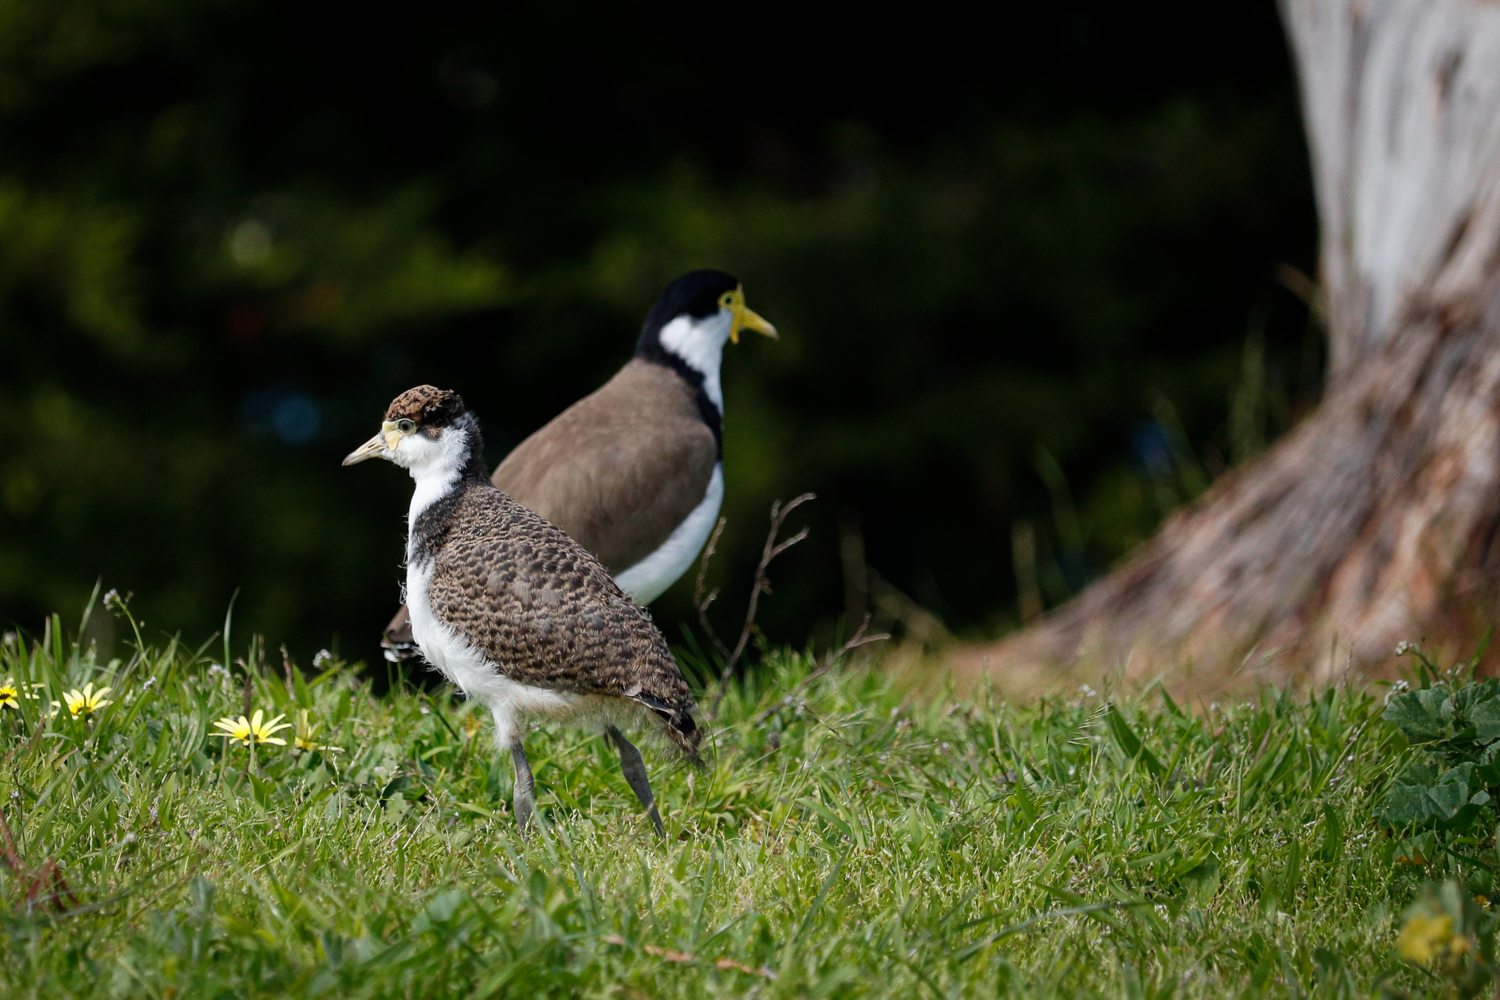 An adult plover facing right standing behind a juvenile plover facing left